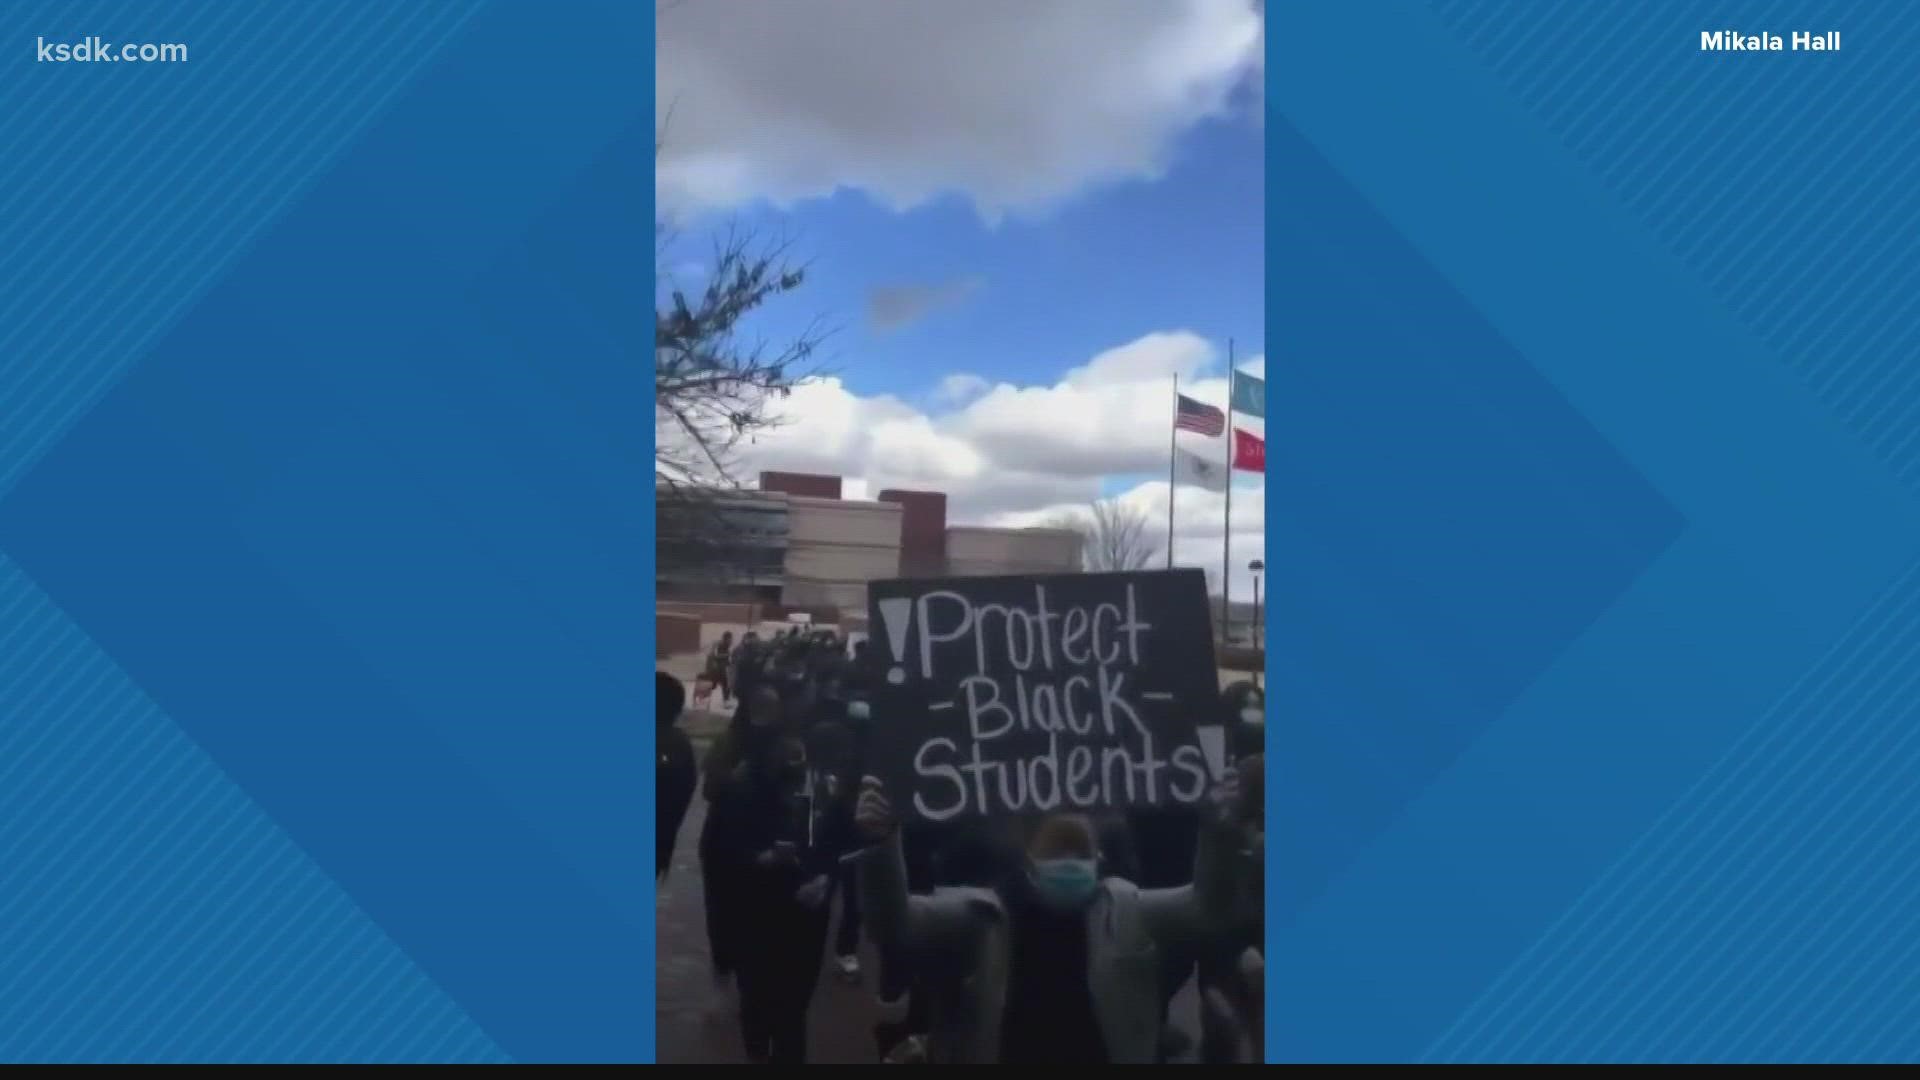 The incident sparked days of student protests and a Secret Service investigation.